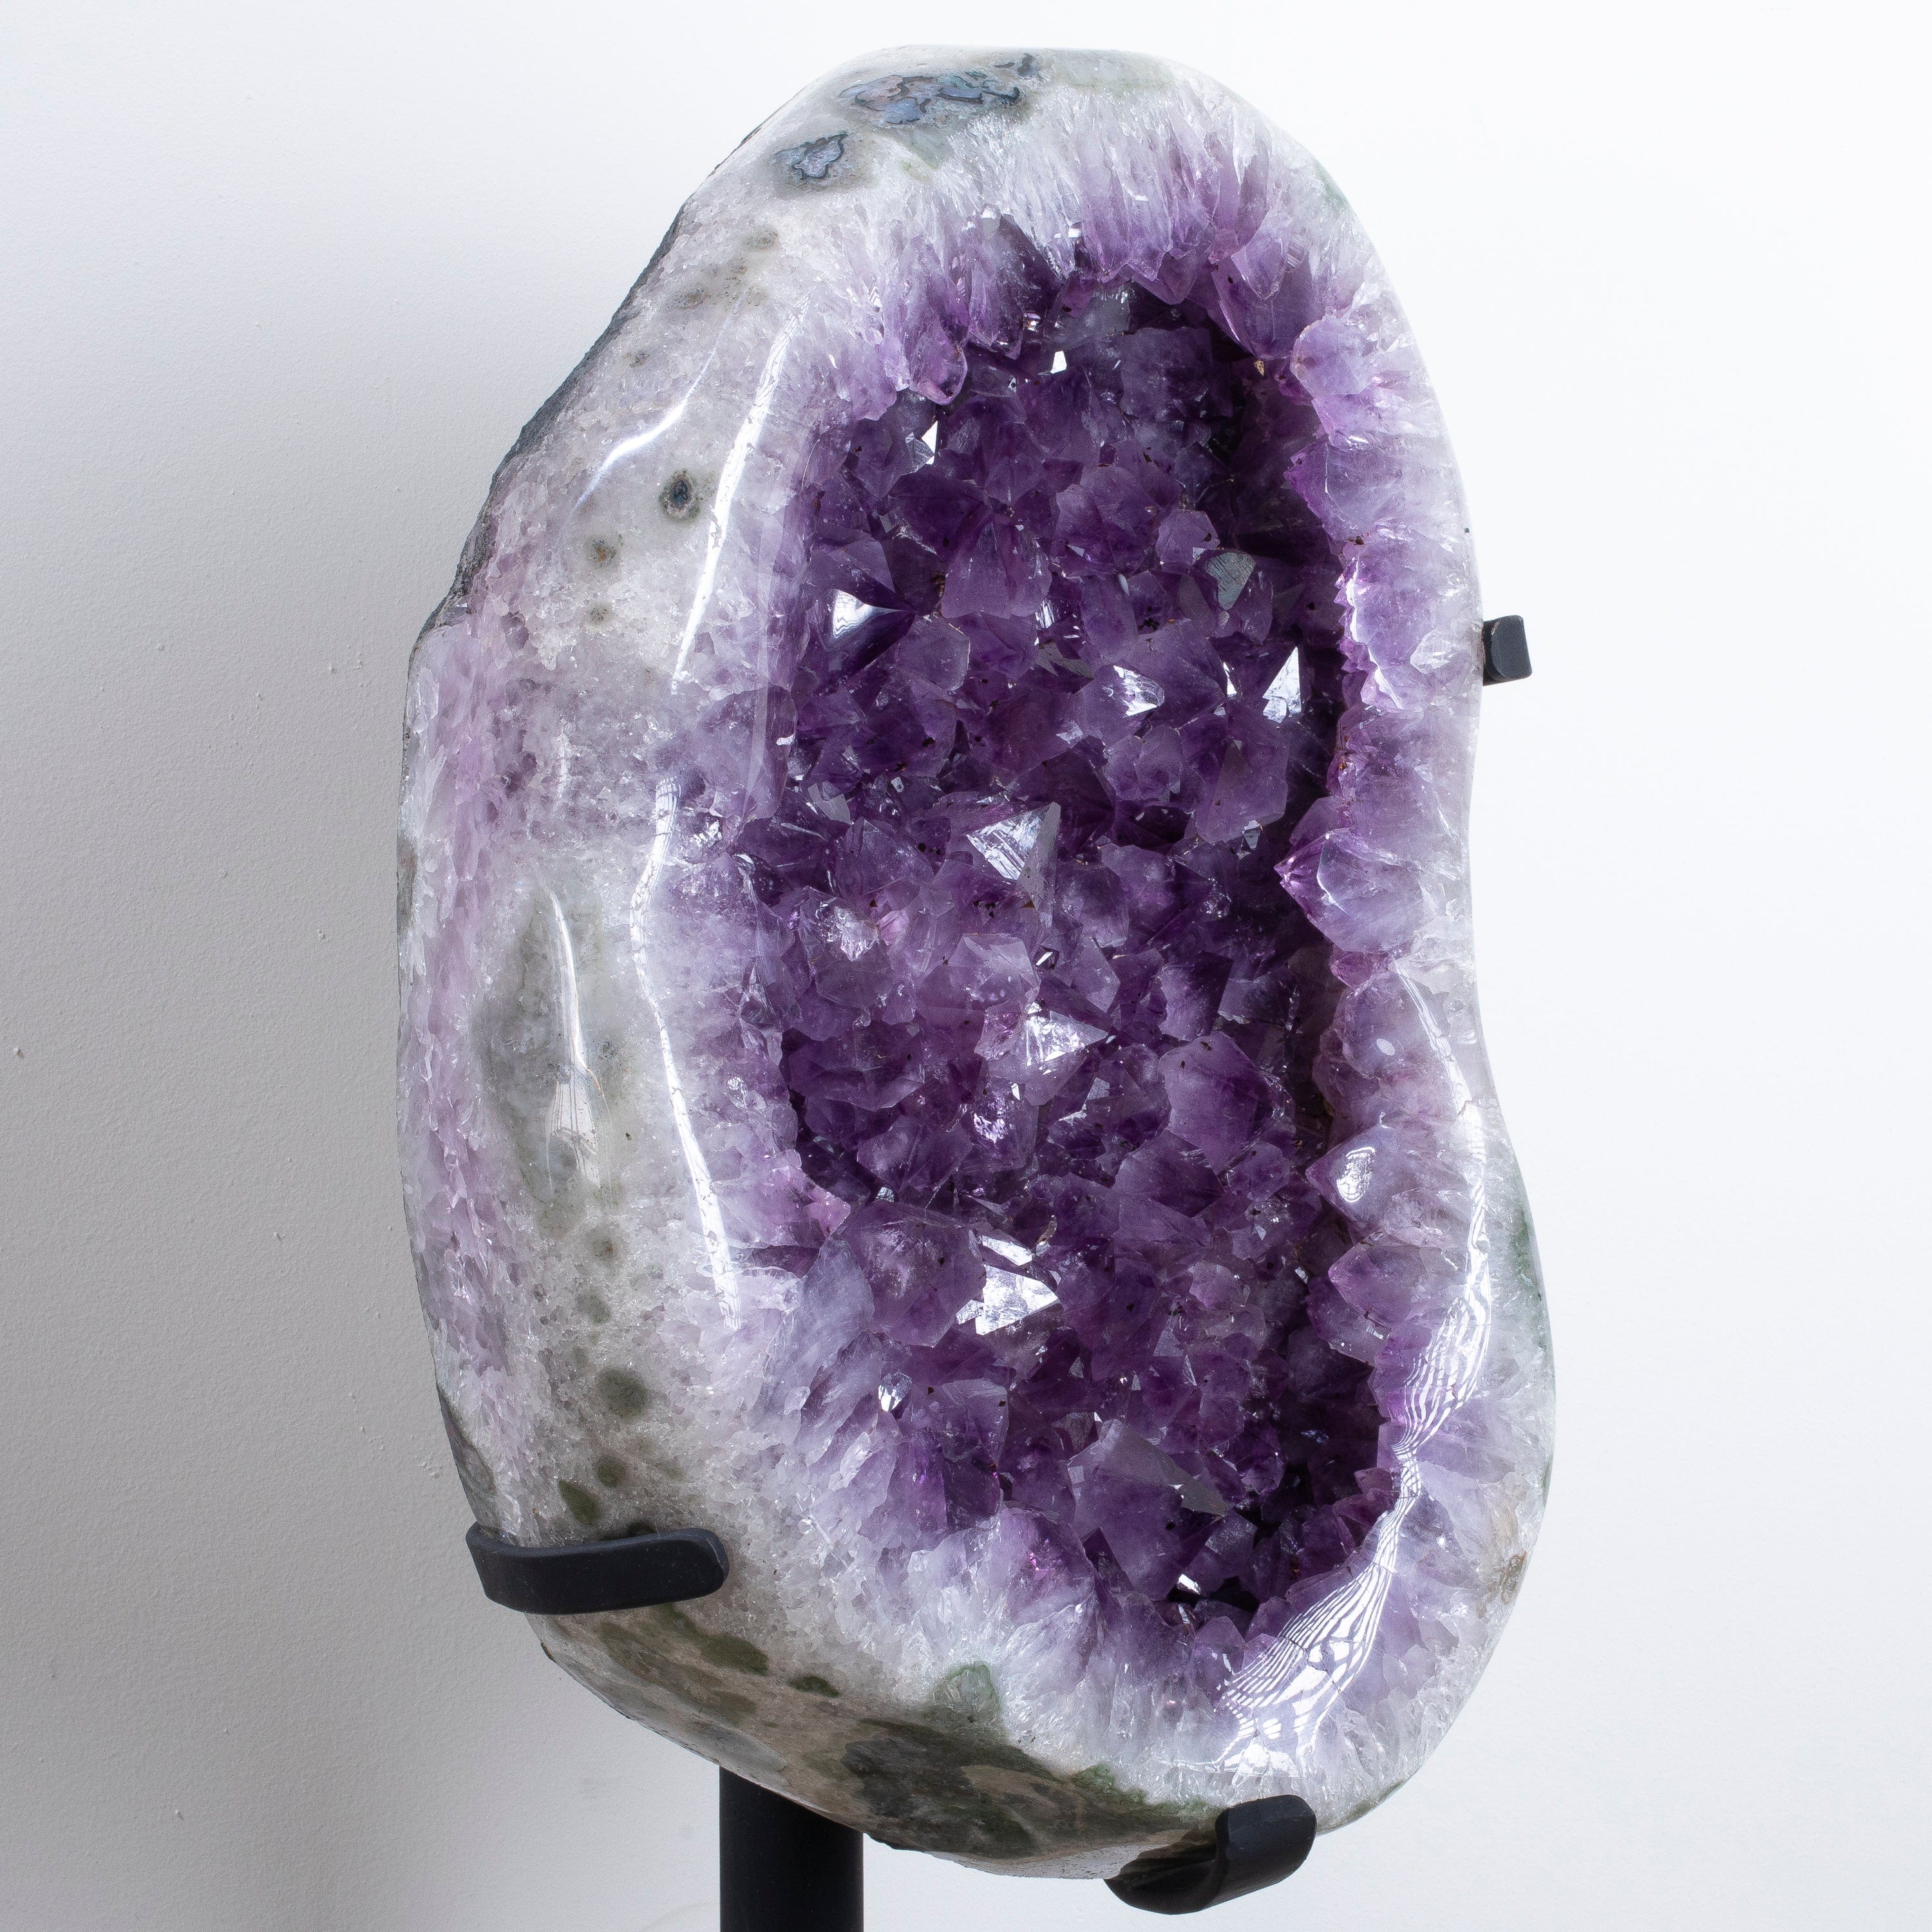 Kalifano Amethyst Amethyst Geode from Brazil on Custom Stand- 29" / 52 lbs BAG7000.003